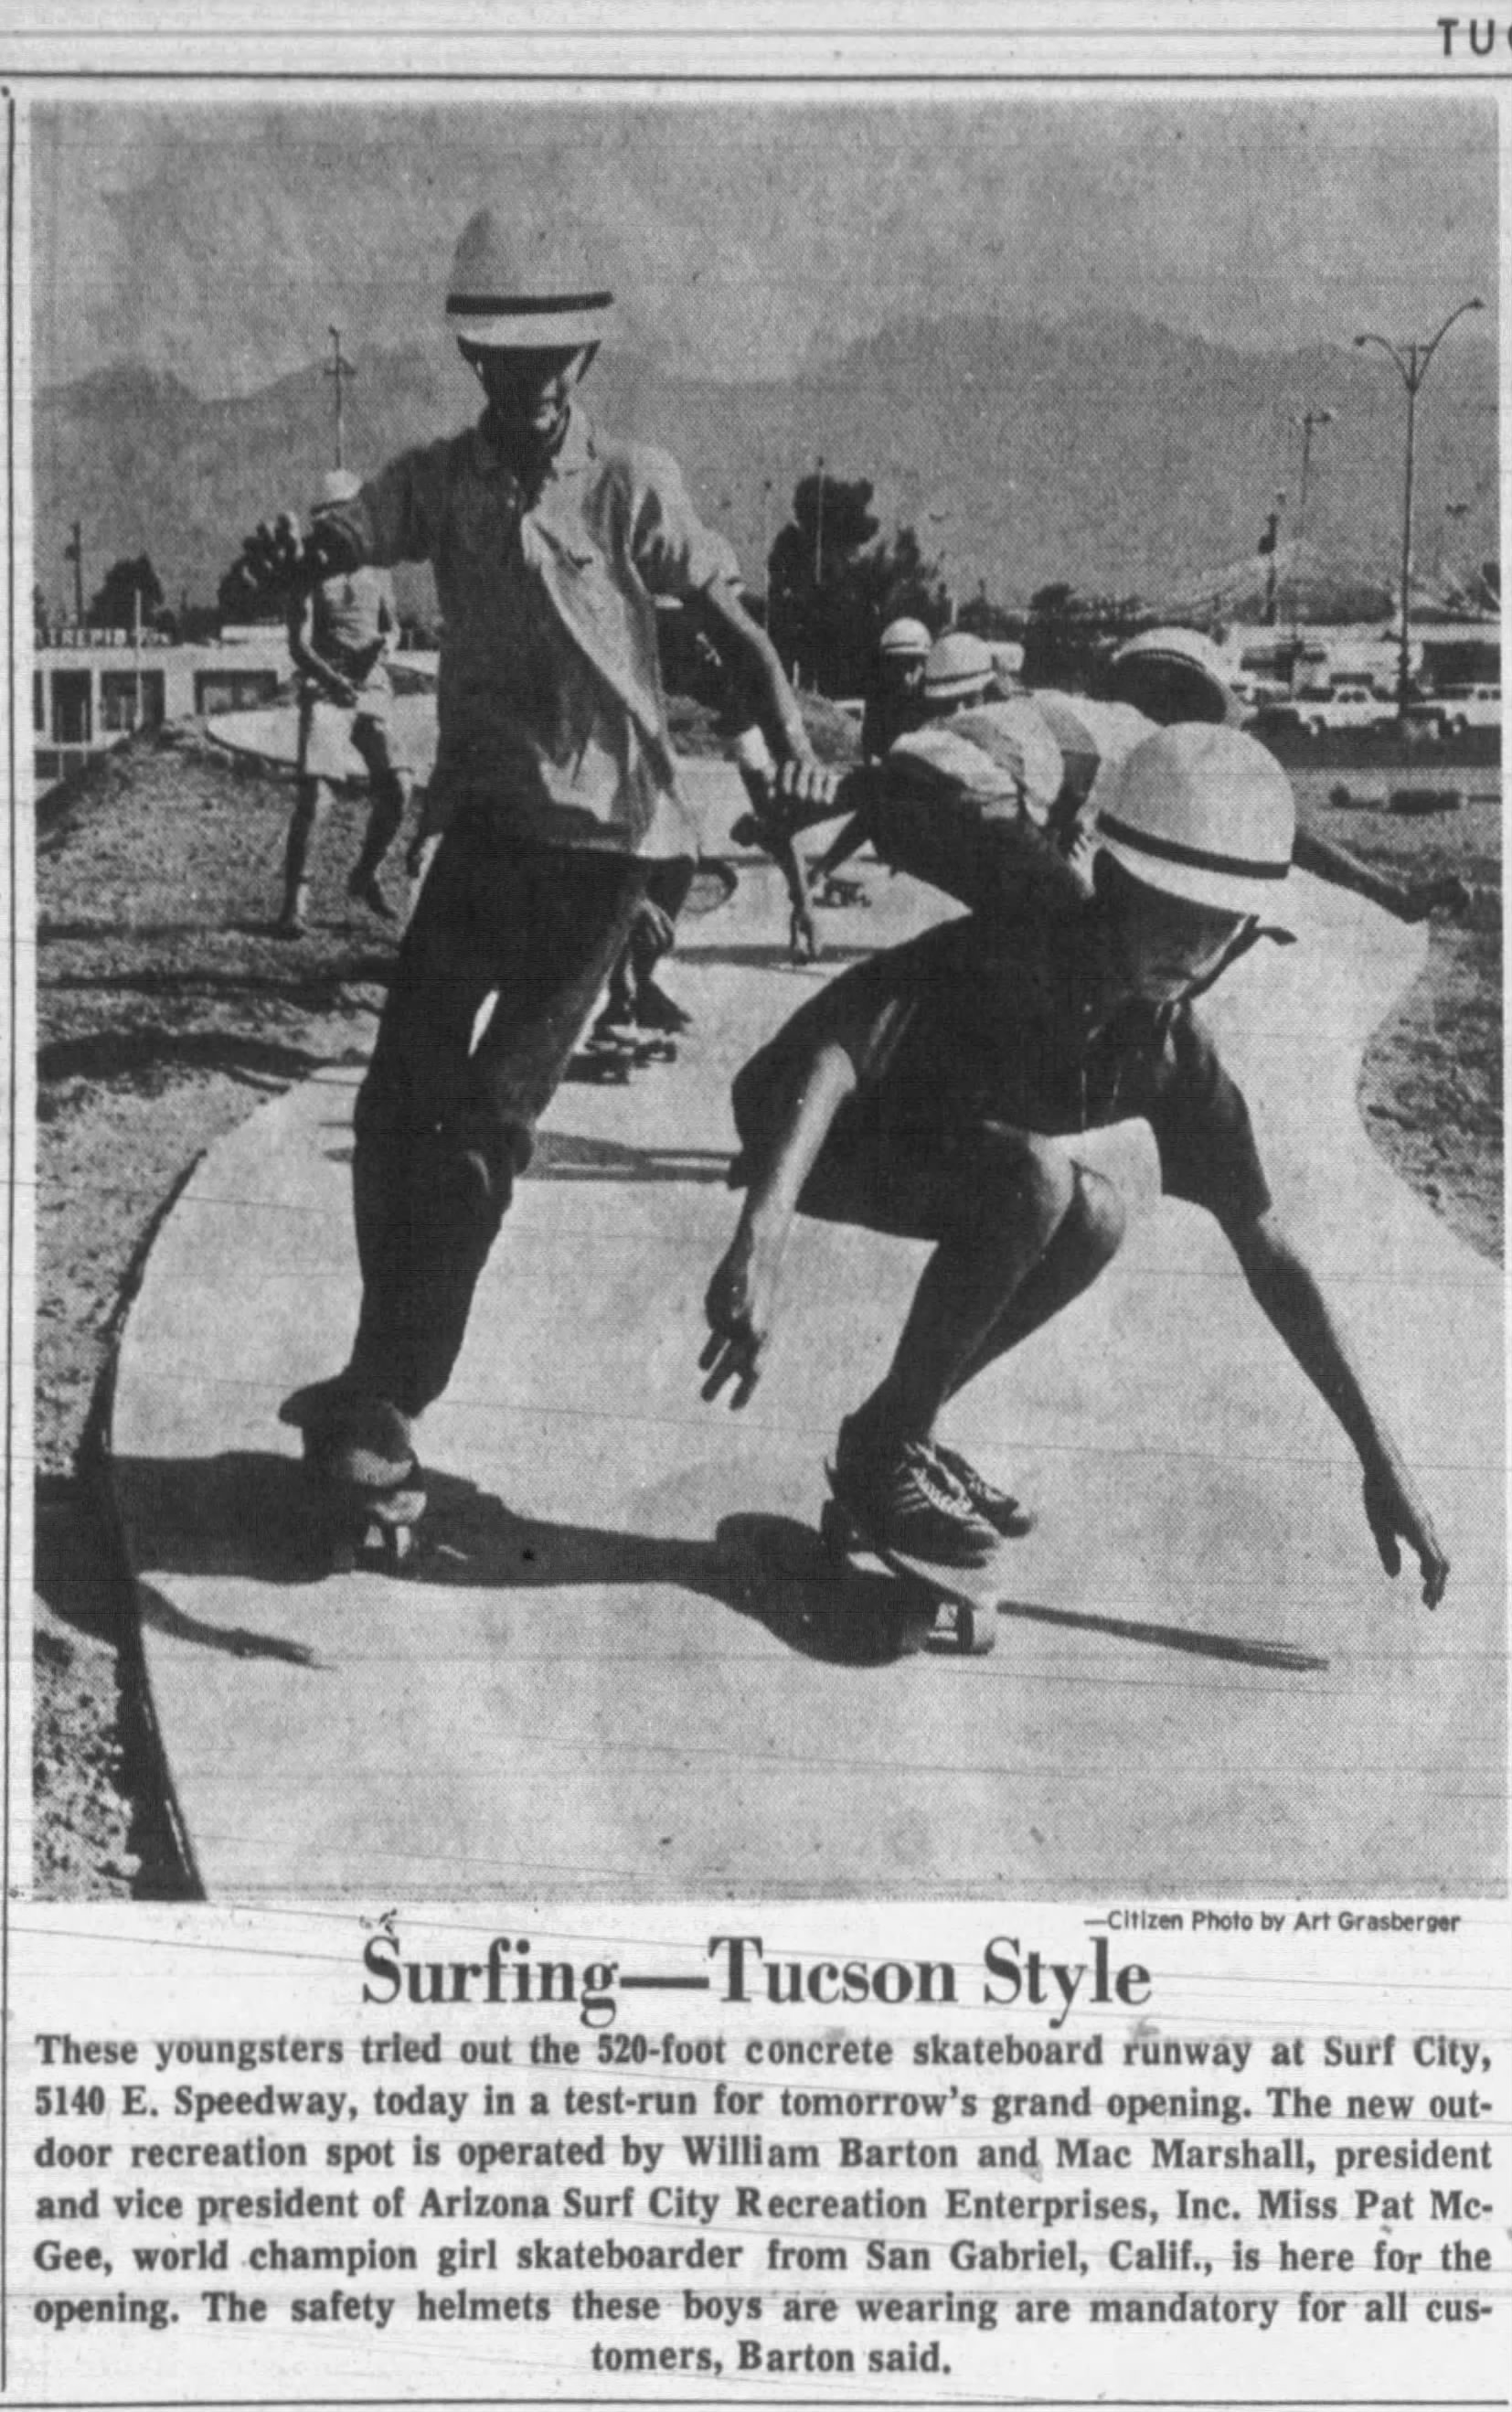 Surf City Tucson 1965 Article from the newspaper in 1965